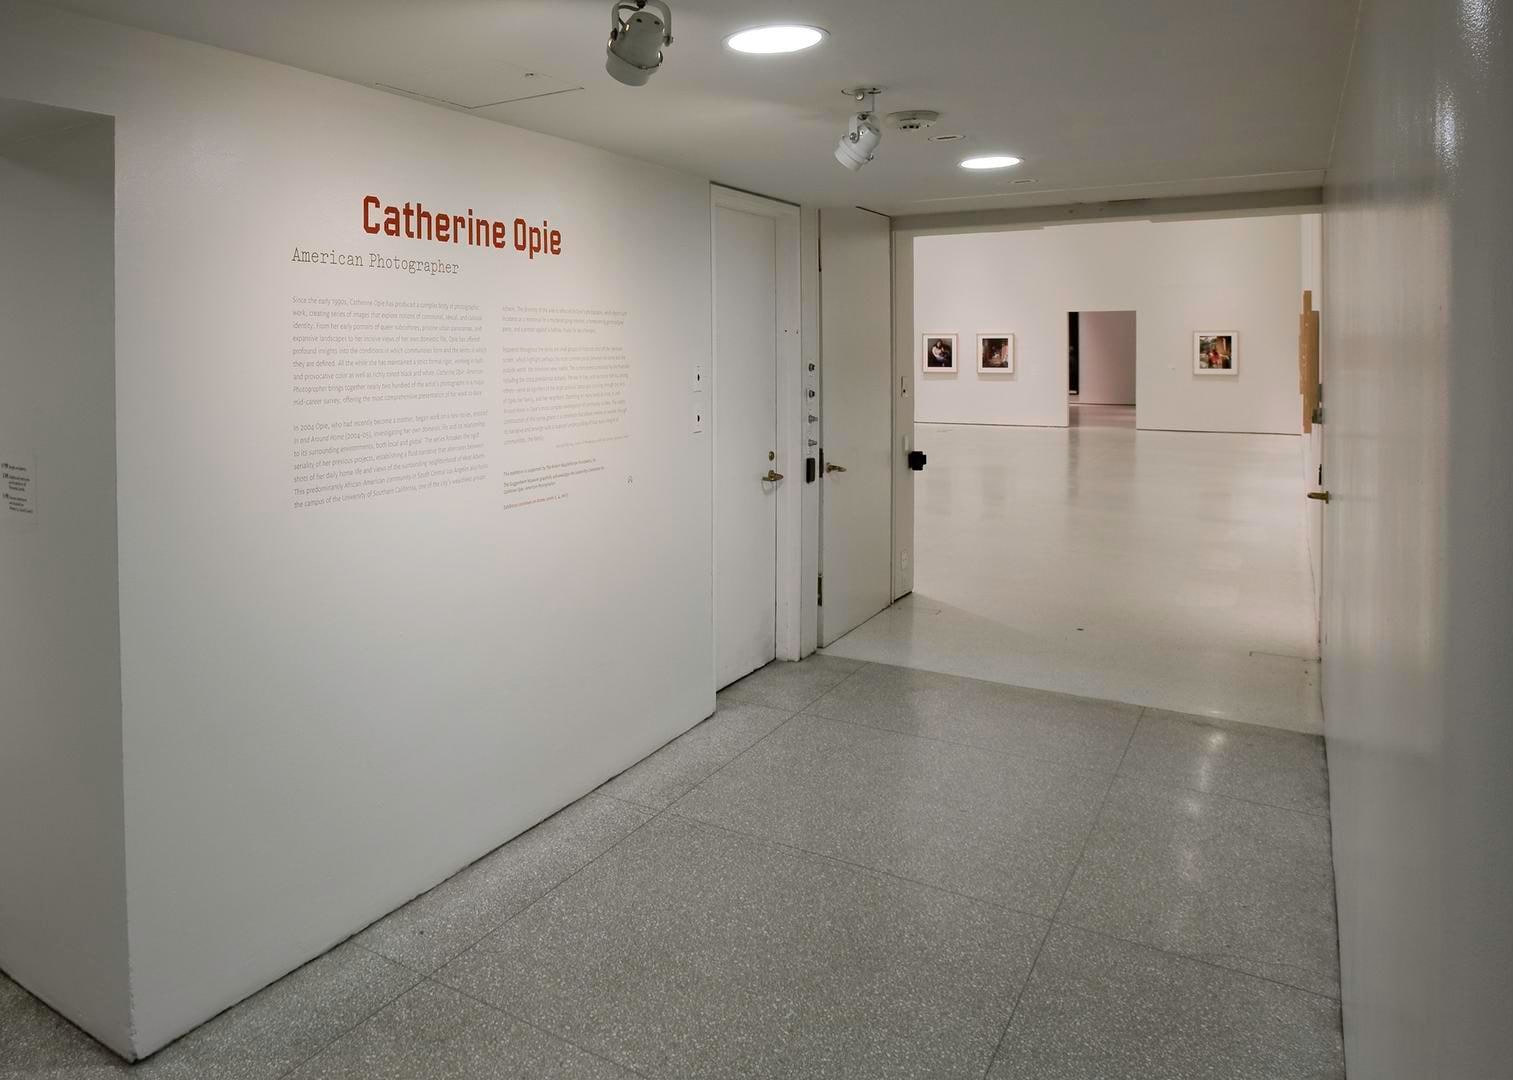  Installation view of Catherine Opie: American Photographer at the Solomon R. Guggenheim Museum, New York